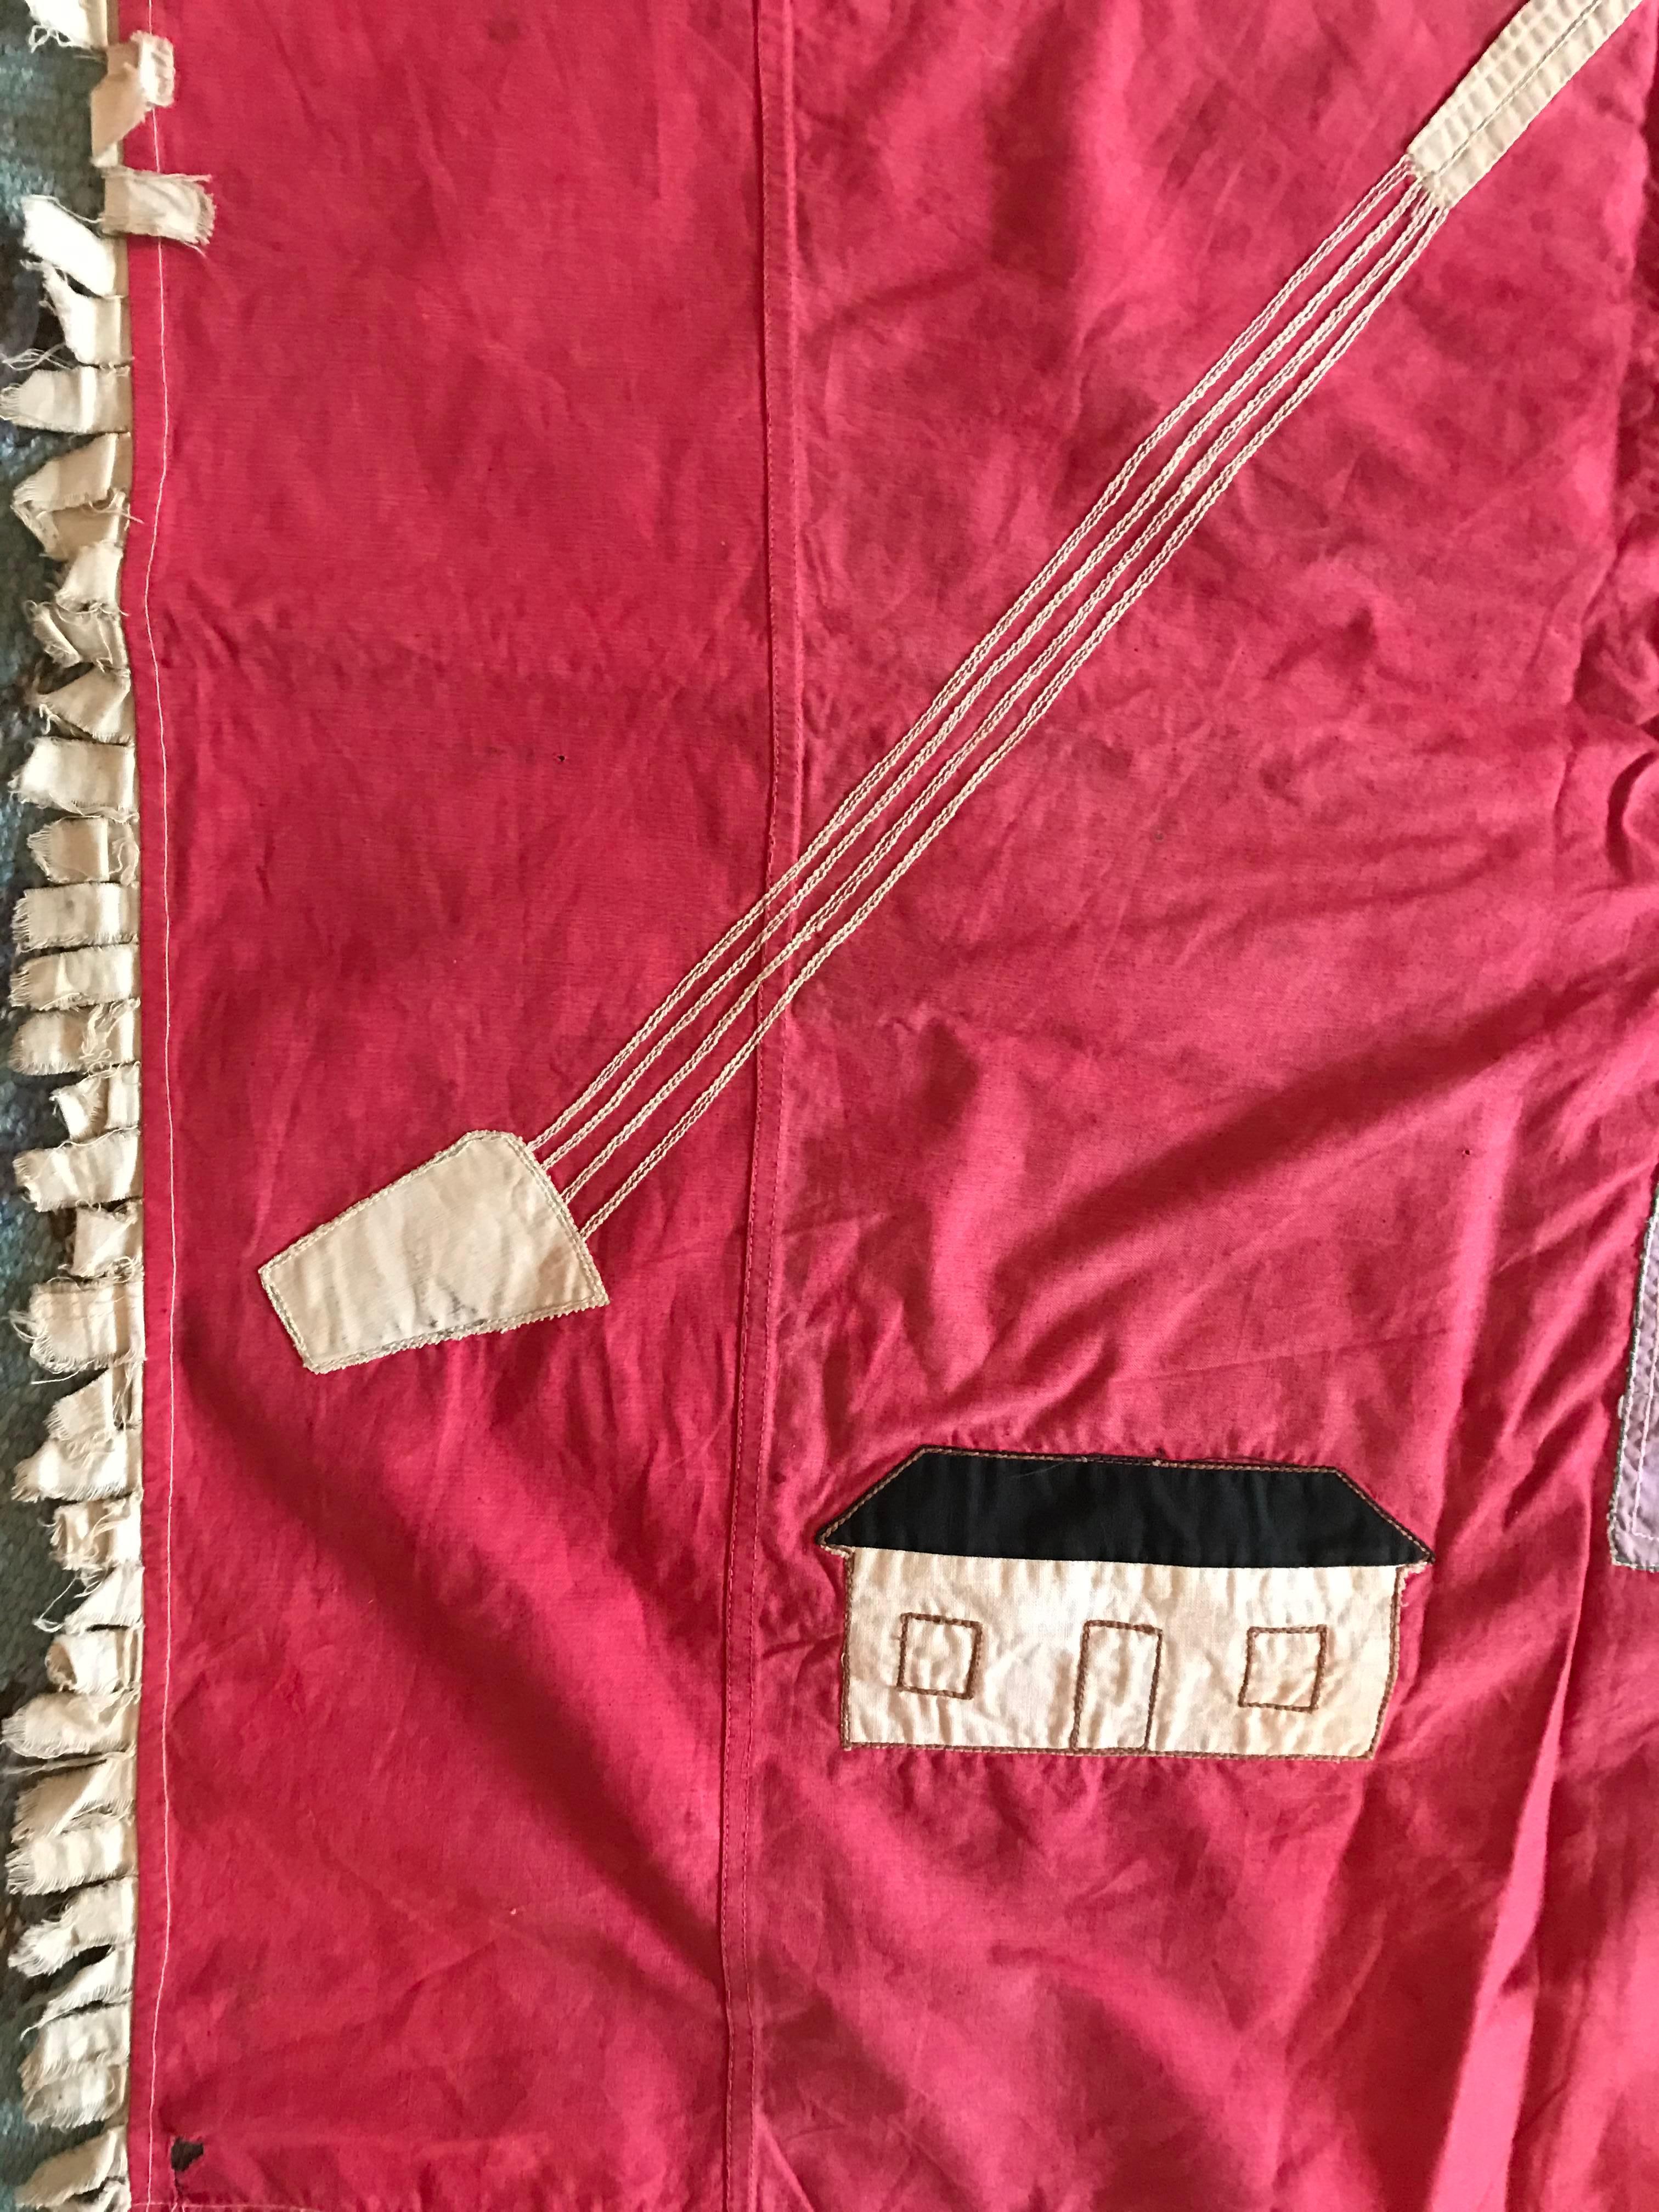 Hand-Crafted Vintage Asafo Flag in Pink Cotton Appliqué Pattern by Fante People, Ghana, 1960s For Sale